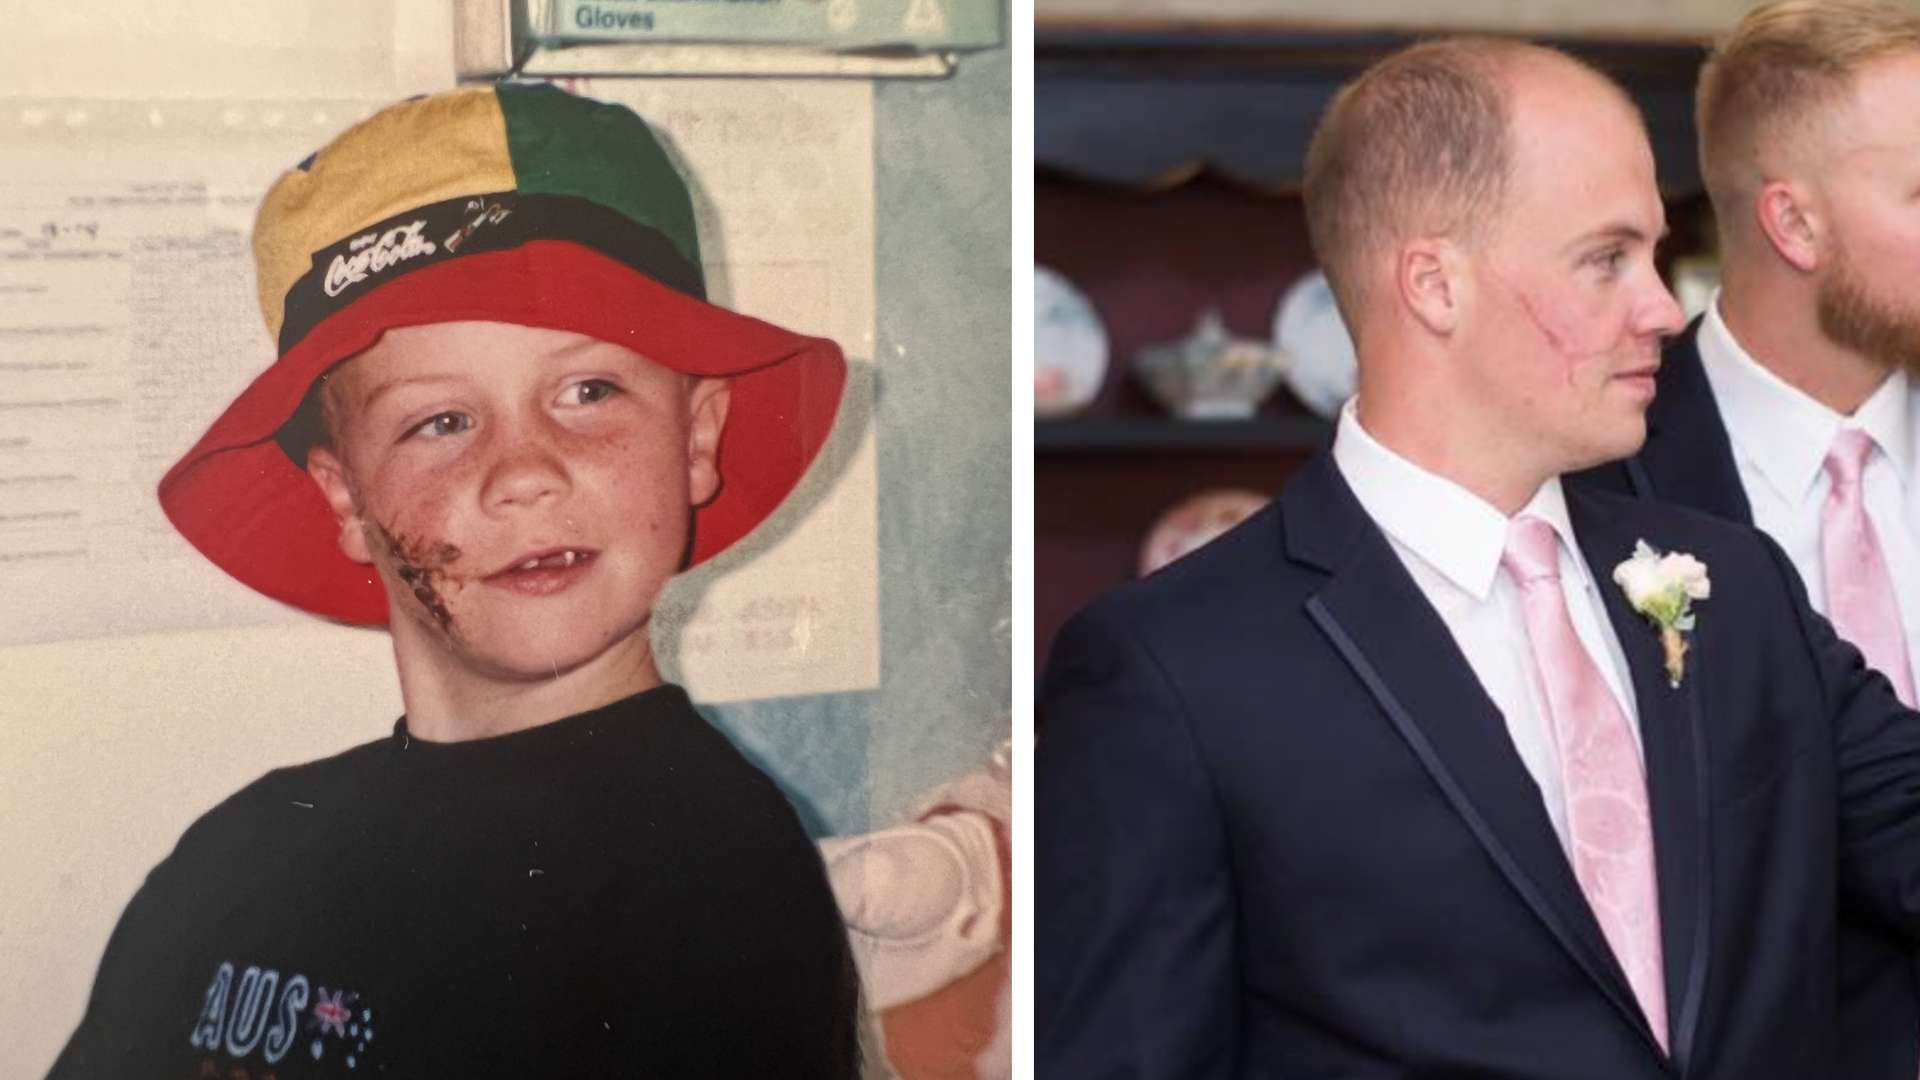 Two images of Dan, one showing him as a young boy and another as an adult